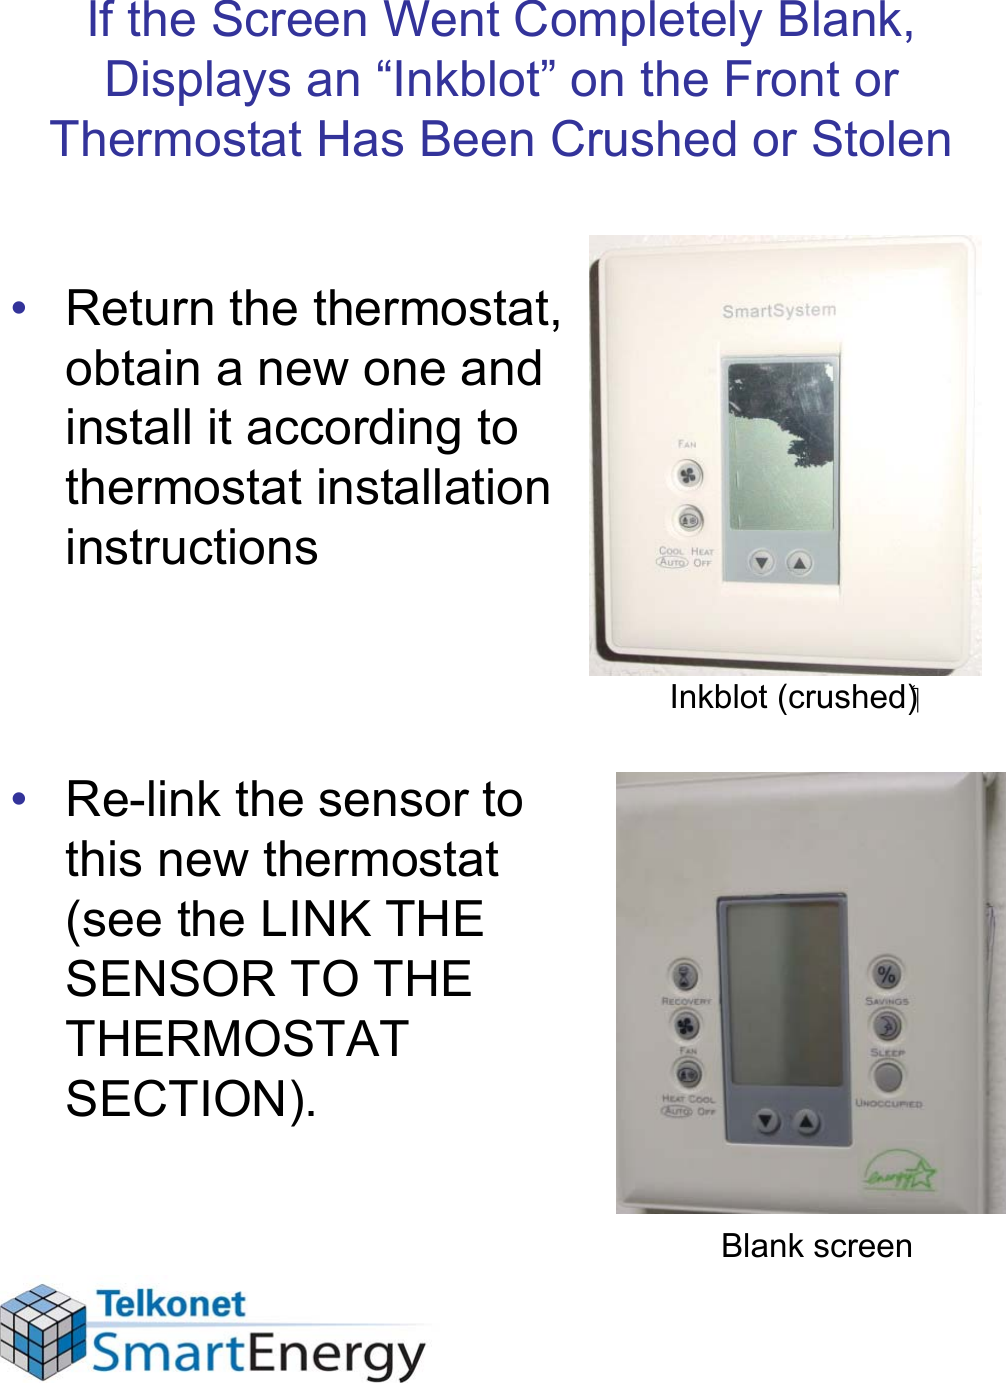 If the Screen Went Completely Blank, Displays an “Inkblot” on the Front or Thermostat Has Been Crushed or Stolen• Return the thermostat, obtain a new one and install it according to thermostat installation instructions• Re-link the sensor to this new thermostat (see the LINK THE SENSOR TO THE THERMOSTAT SECTION).Blank screenInkblot (crushed)